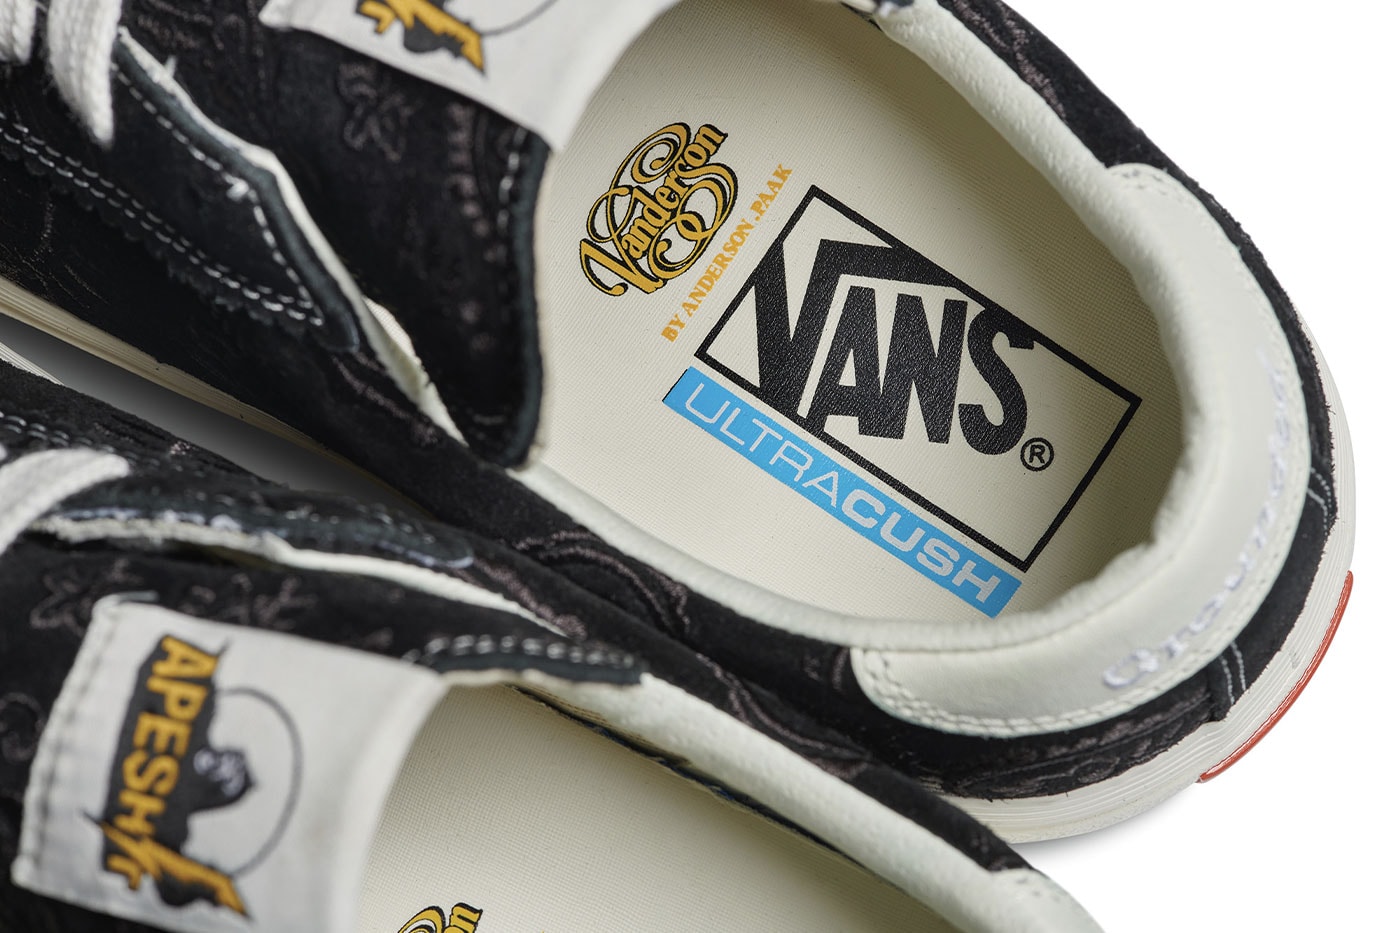 Anderson .Paak and Vans "Vanderson" Collection